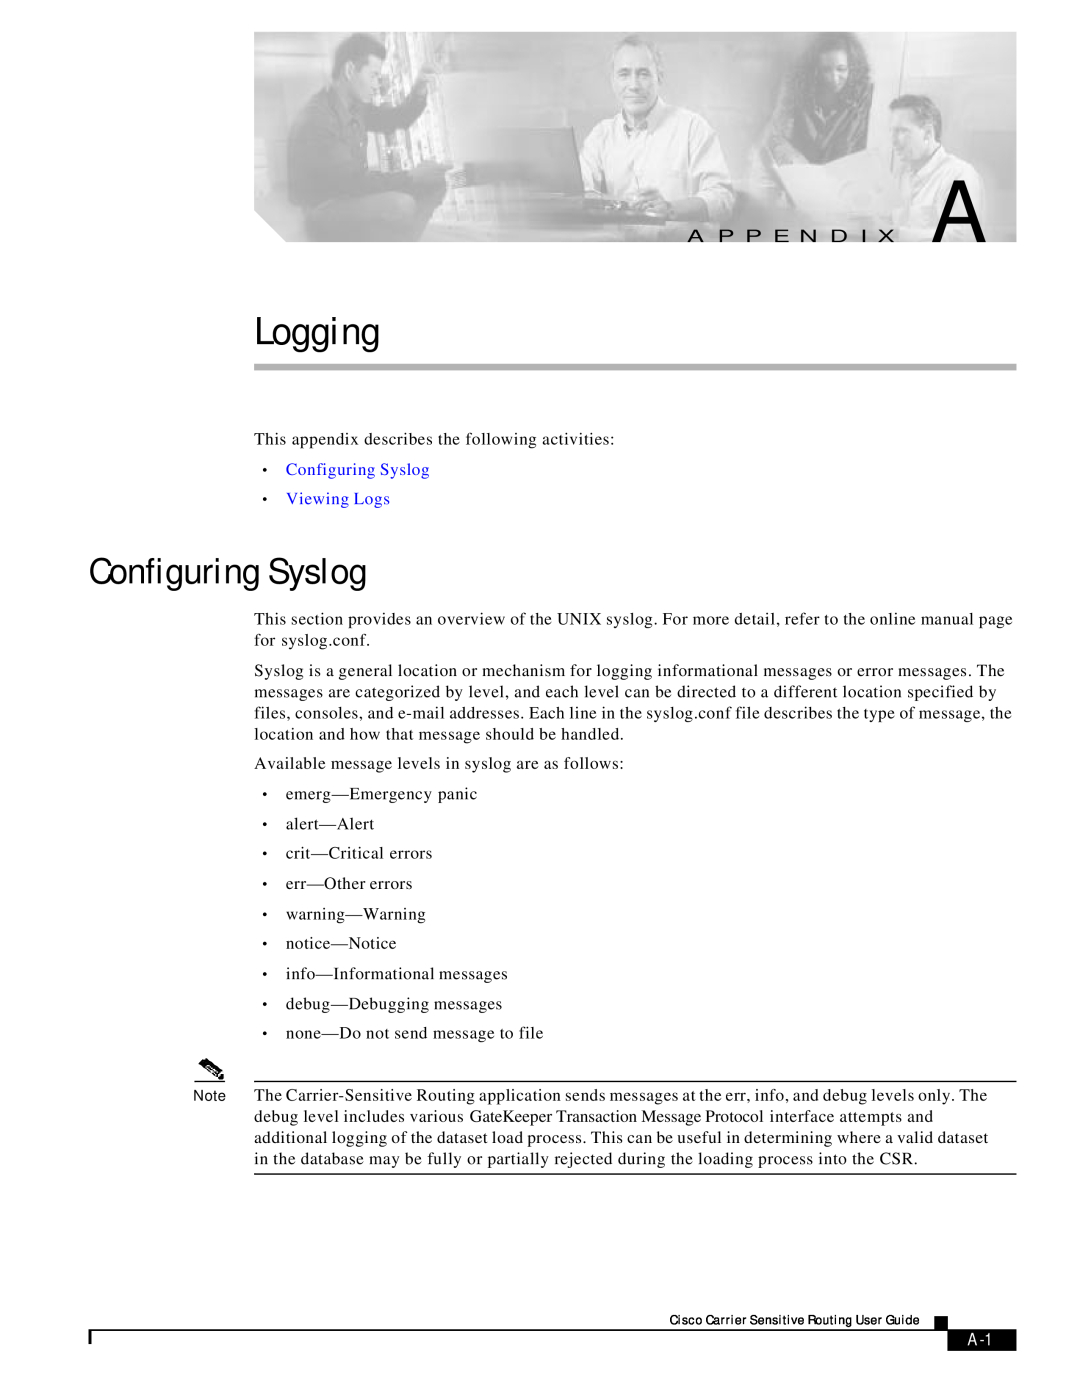 Cisco Systems Version 1.1 manual Logging, Configuring Syslog Viewing Logs 